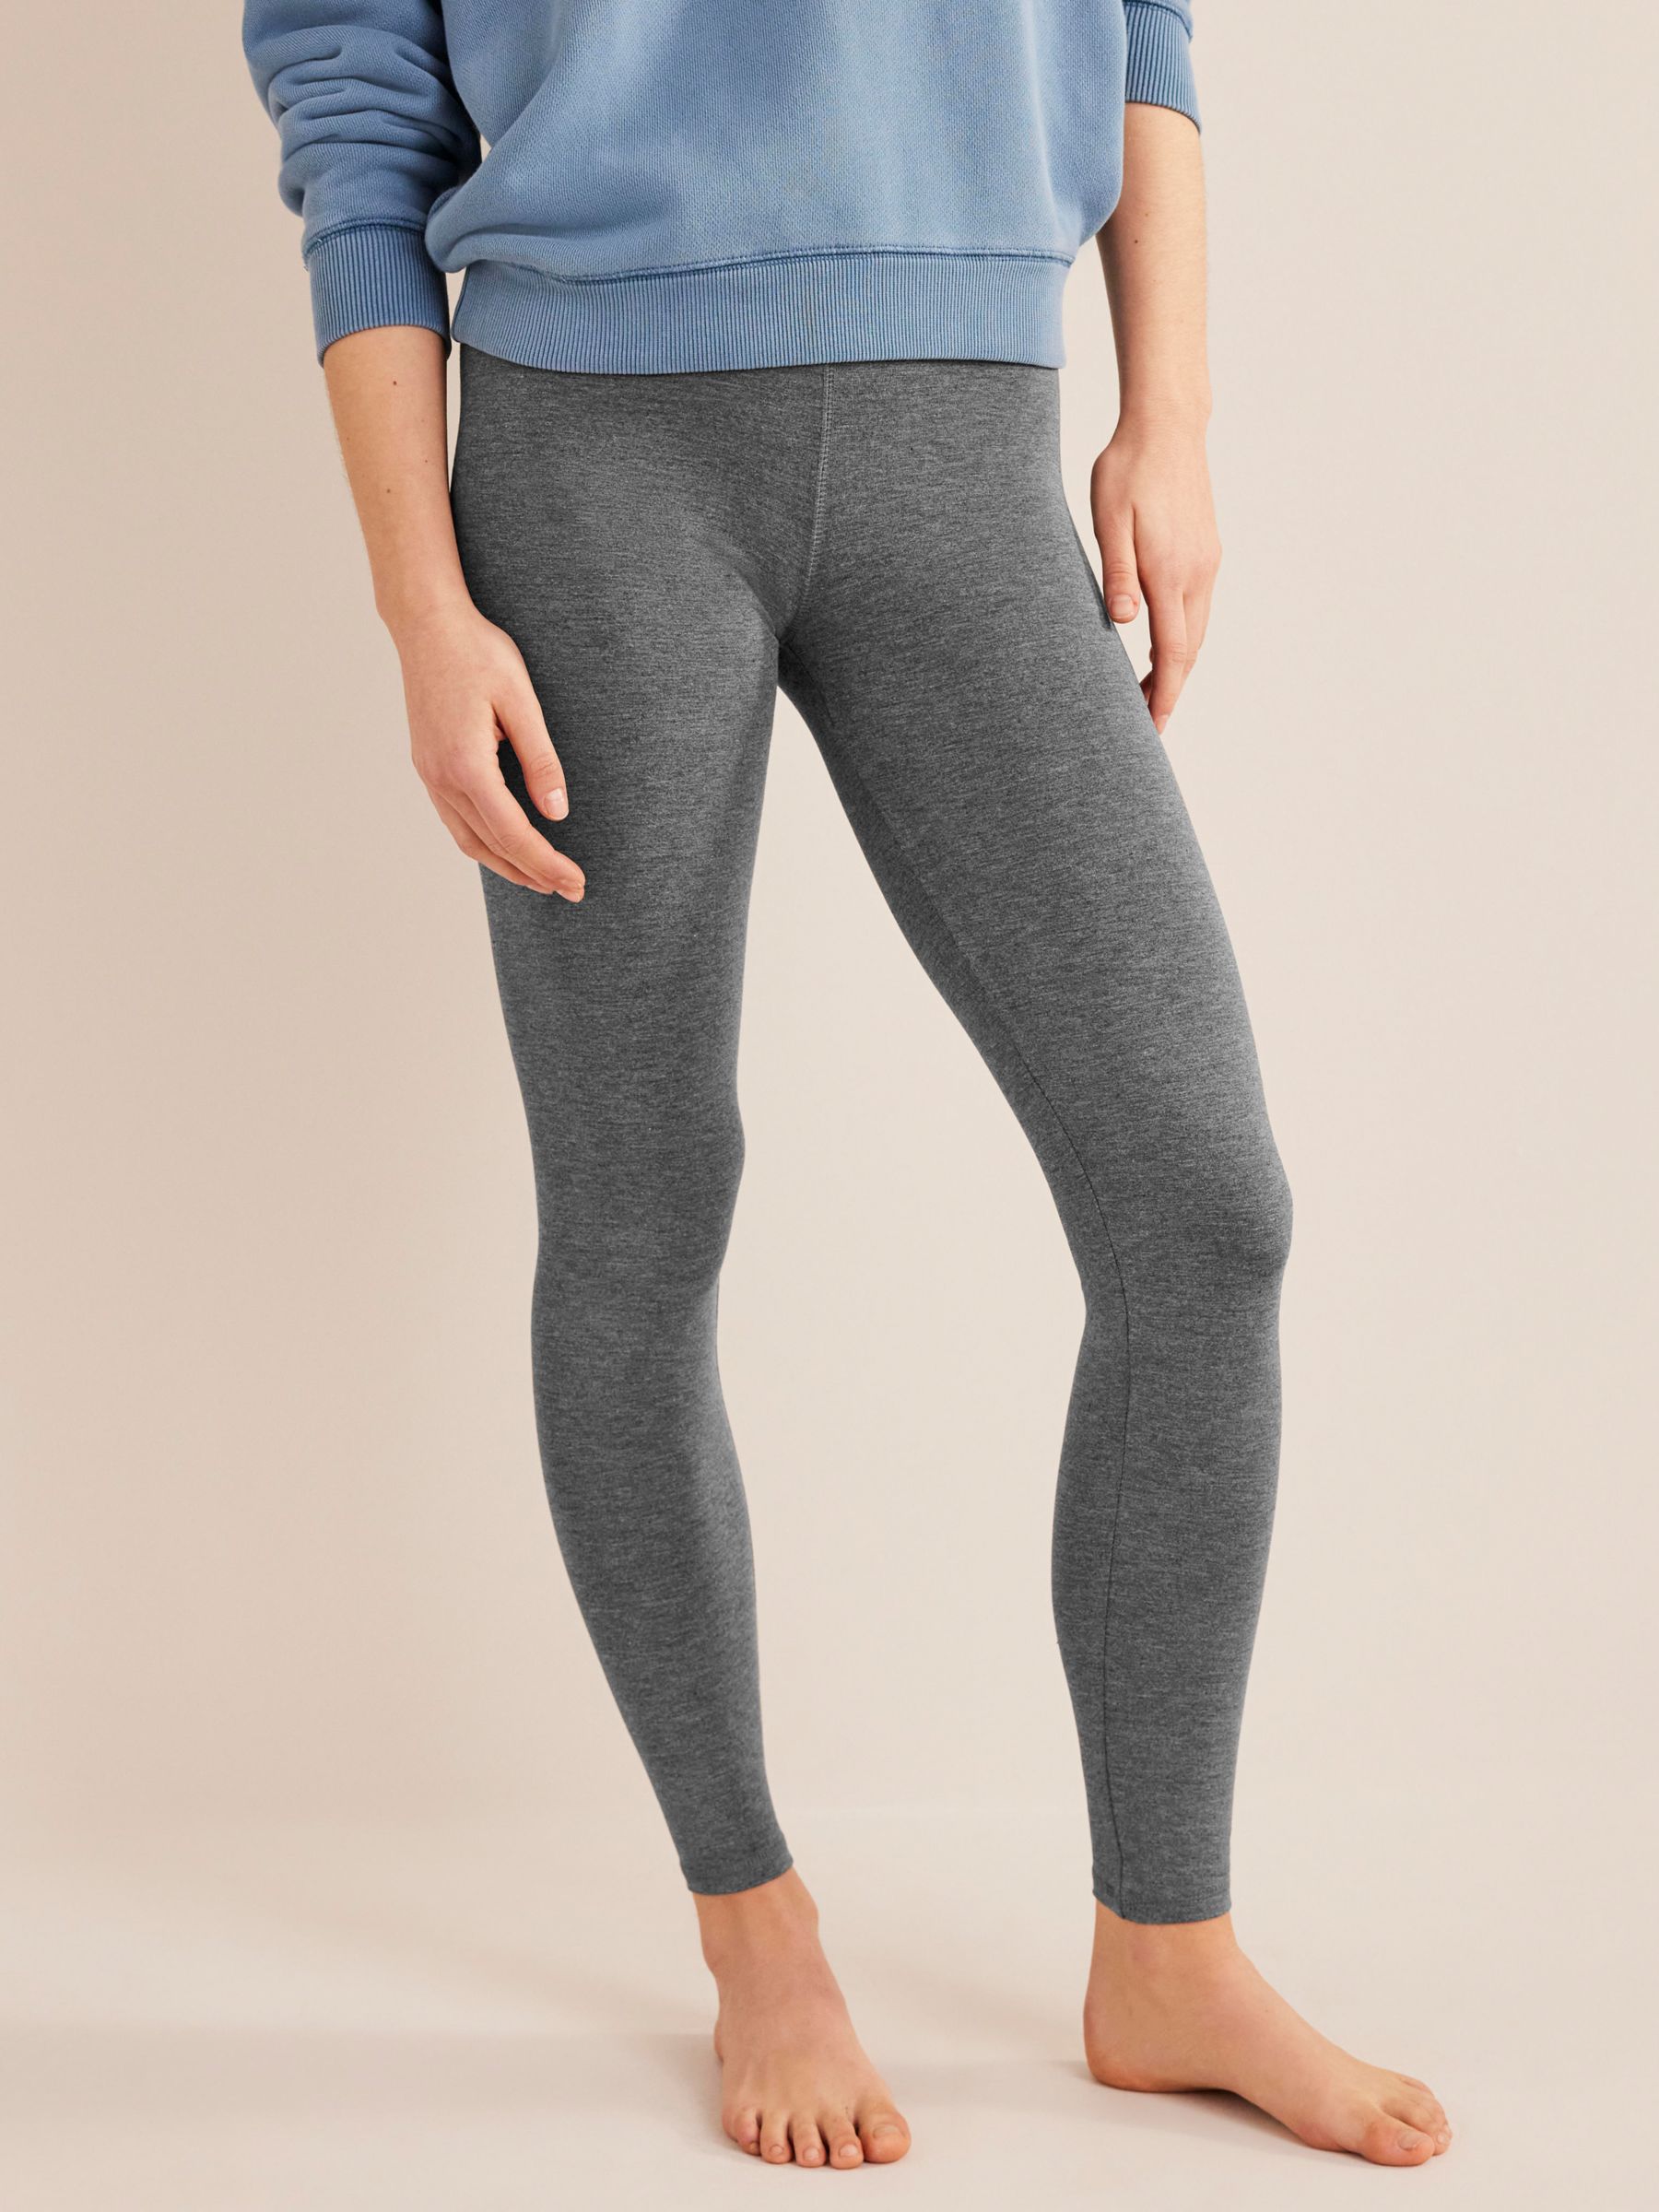 BODEN Soft Jersey Knit Cropped Leggings *Charcoal Marl 10